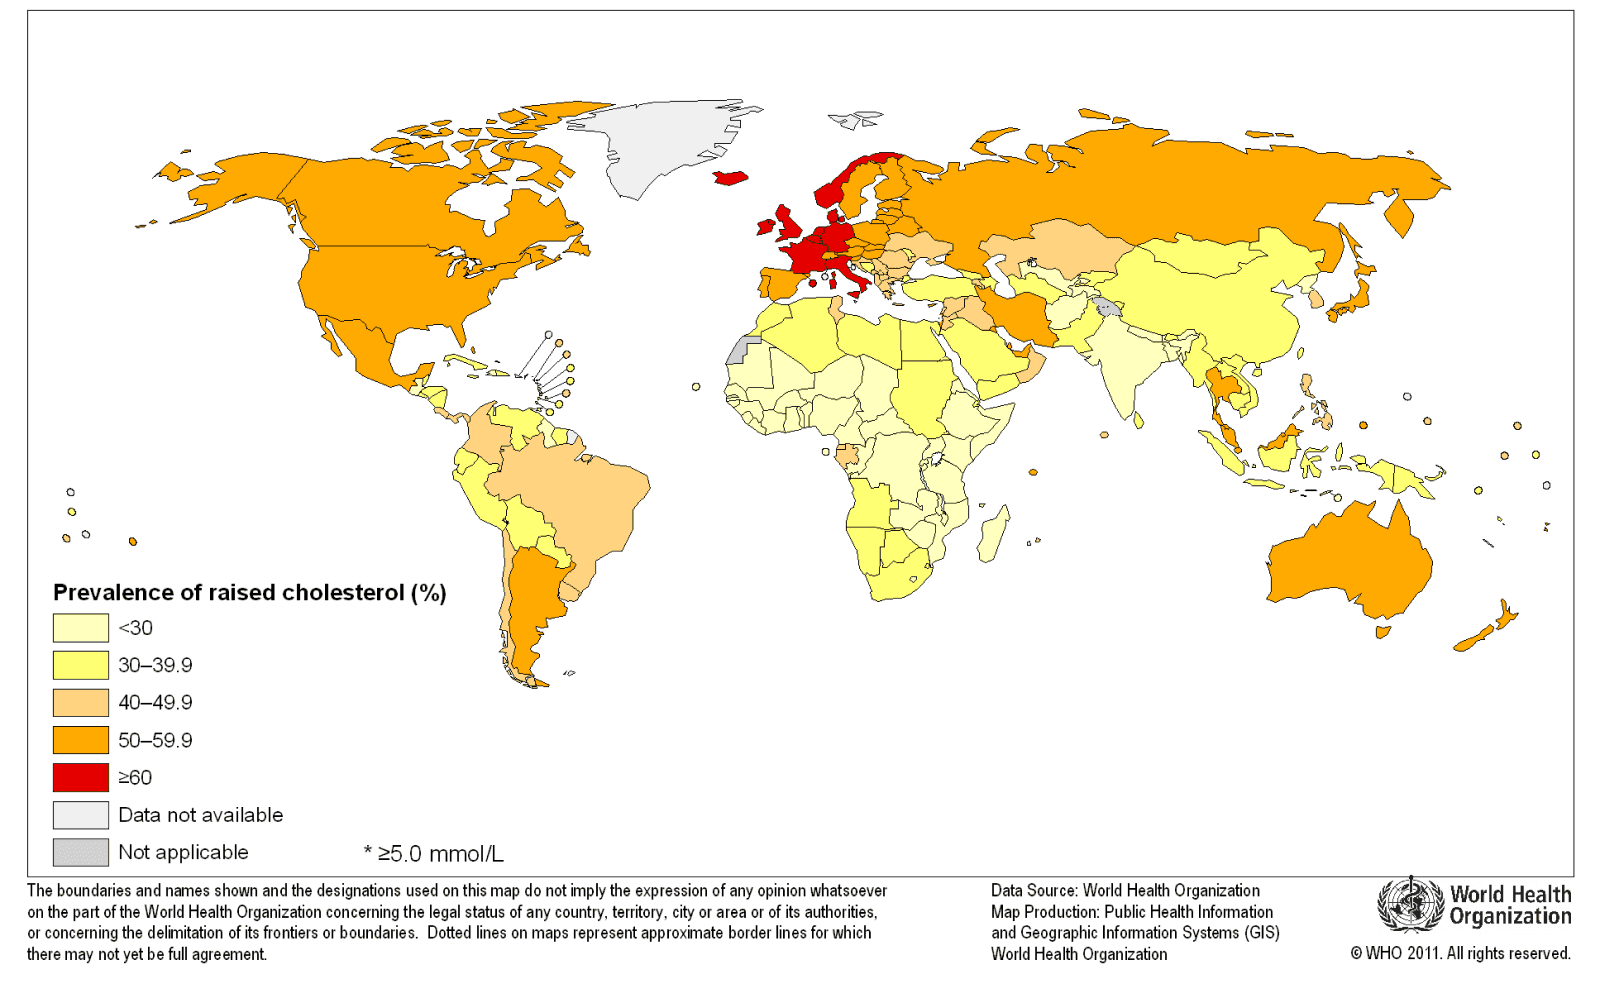 statistics regarding prevalence of raised total cholesterol among adults worldwide published by World Health Organization